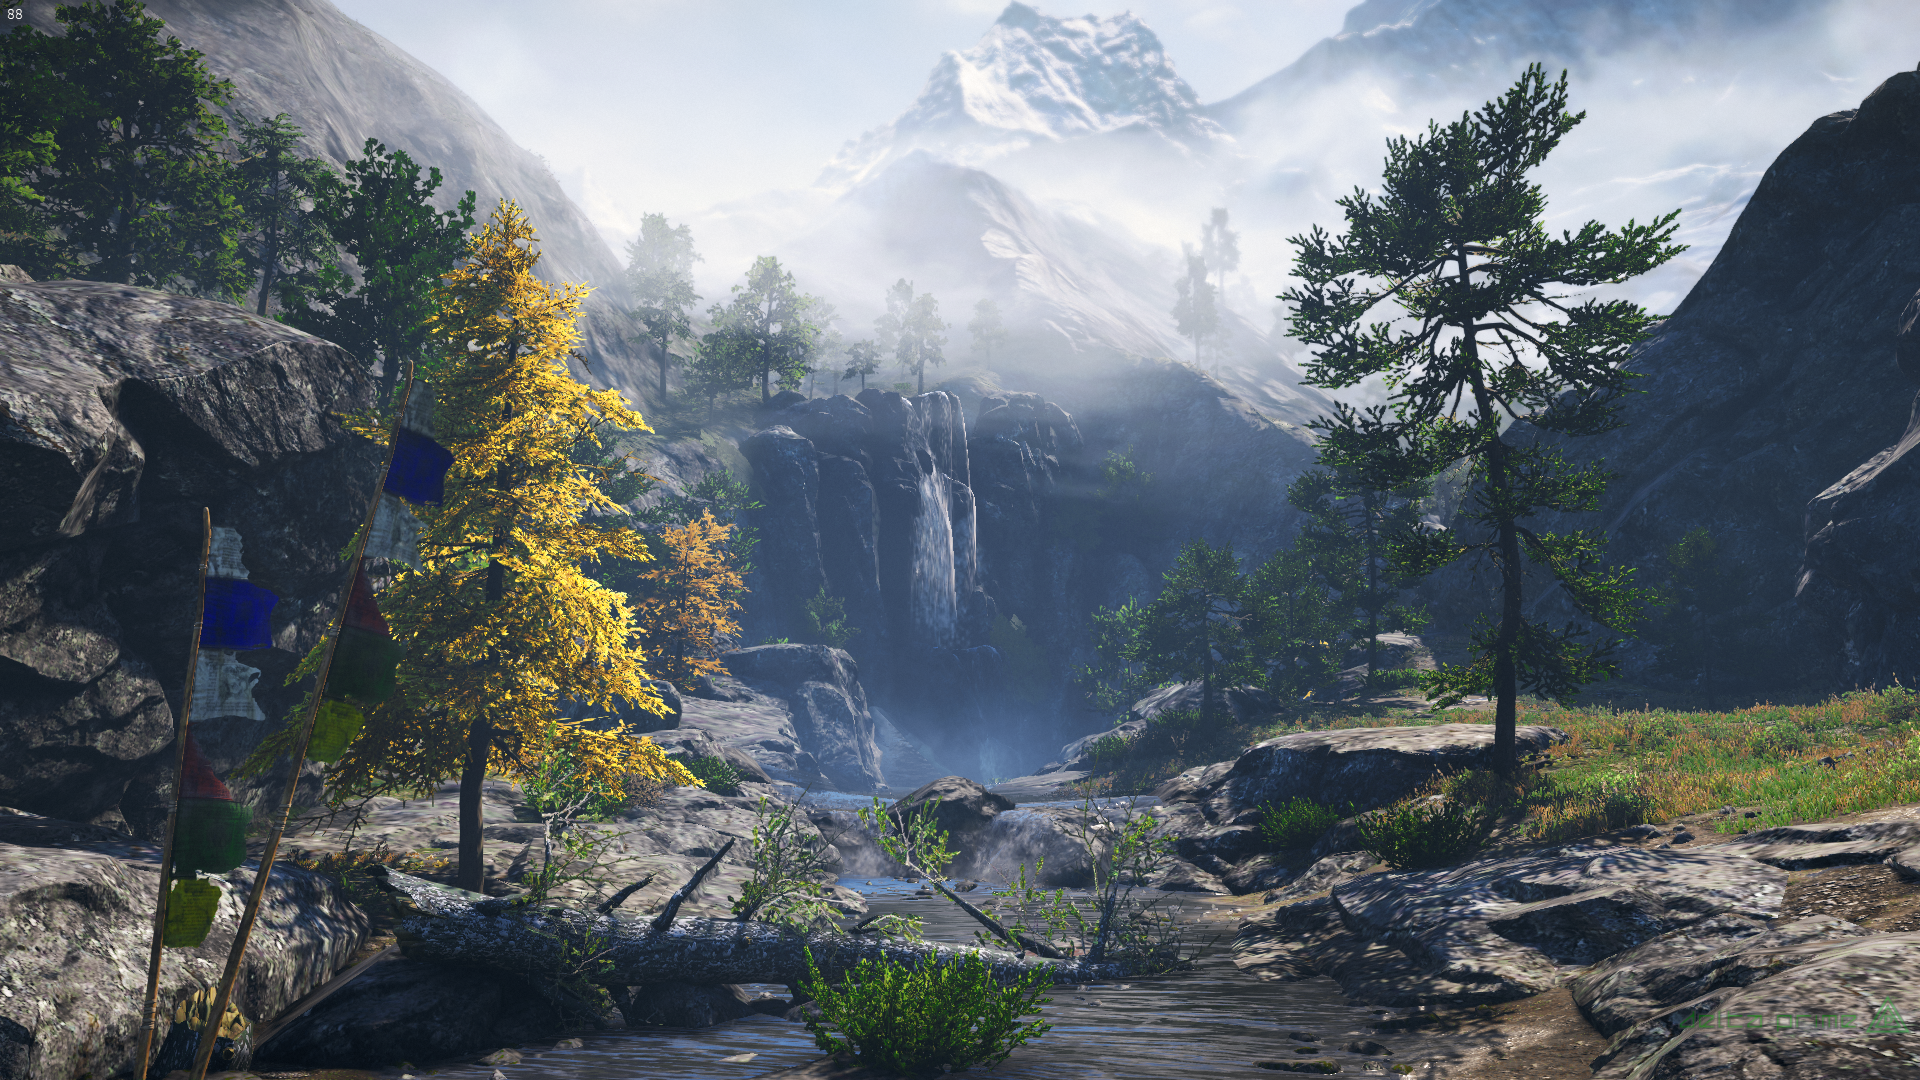 General 1920x1080 Himalayas mountains forest forest clearing waterfall mountain pass Half Dome pine trees Far Cry 4 video games PC gaming screen shot mist river